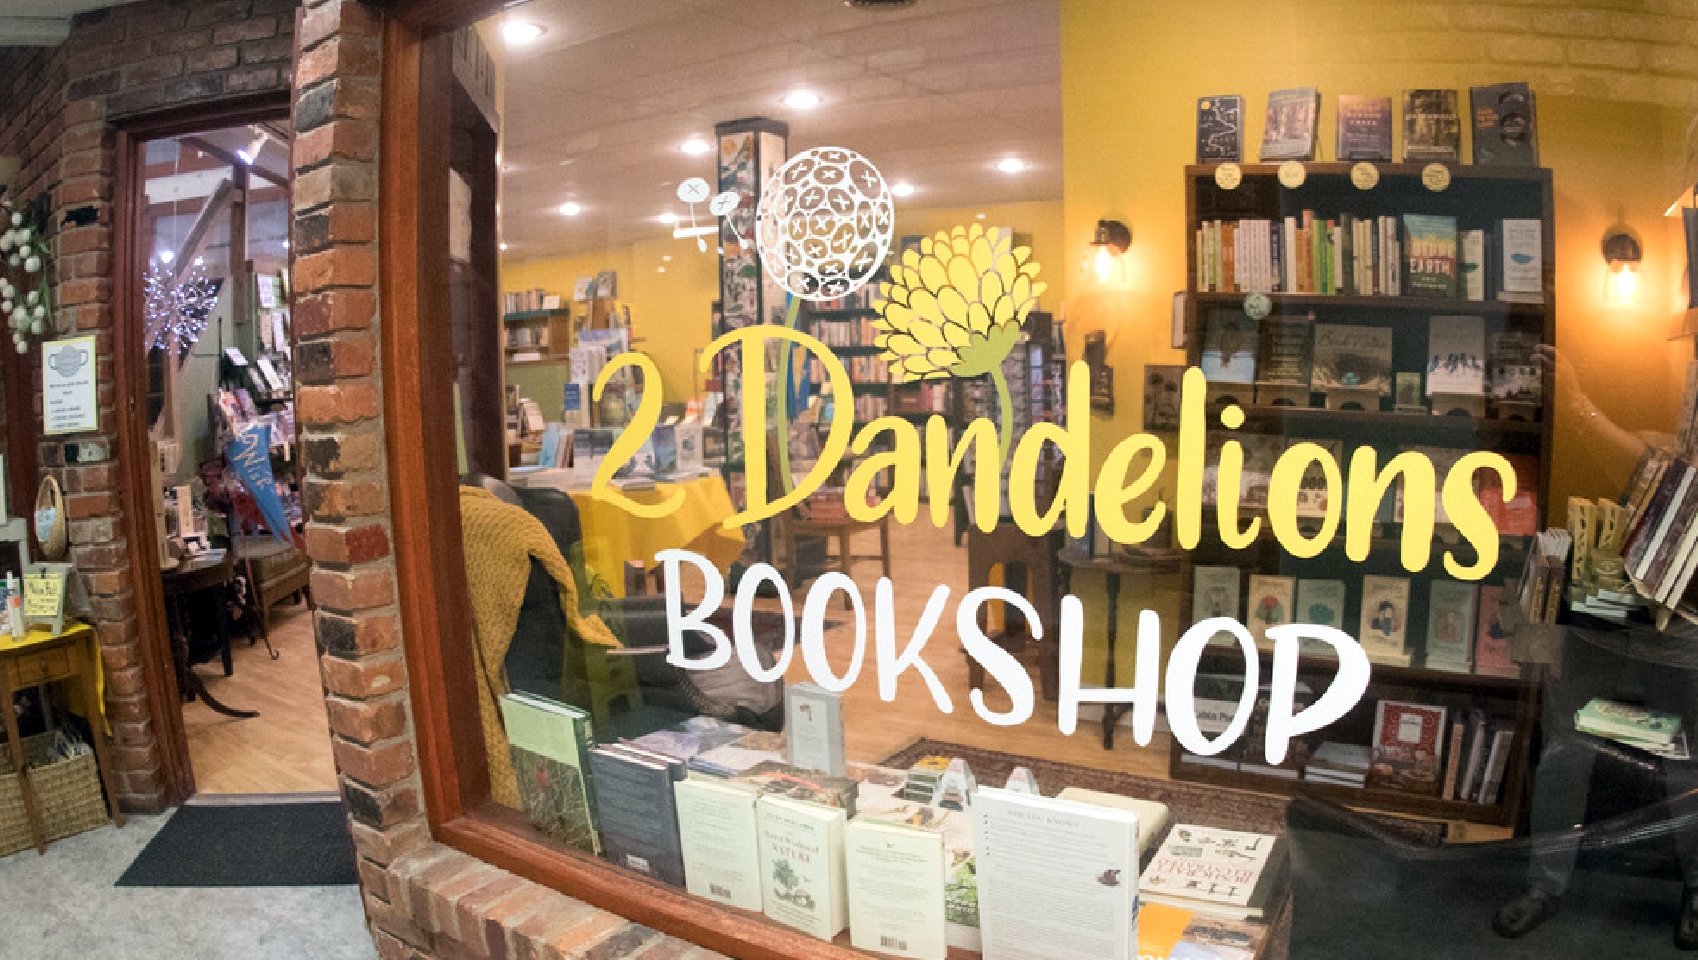 6 cool ways to support indie bookstores right now: Donation to BINC